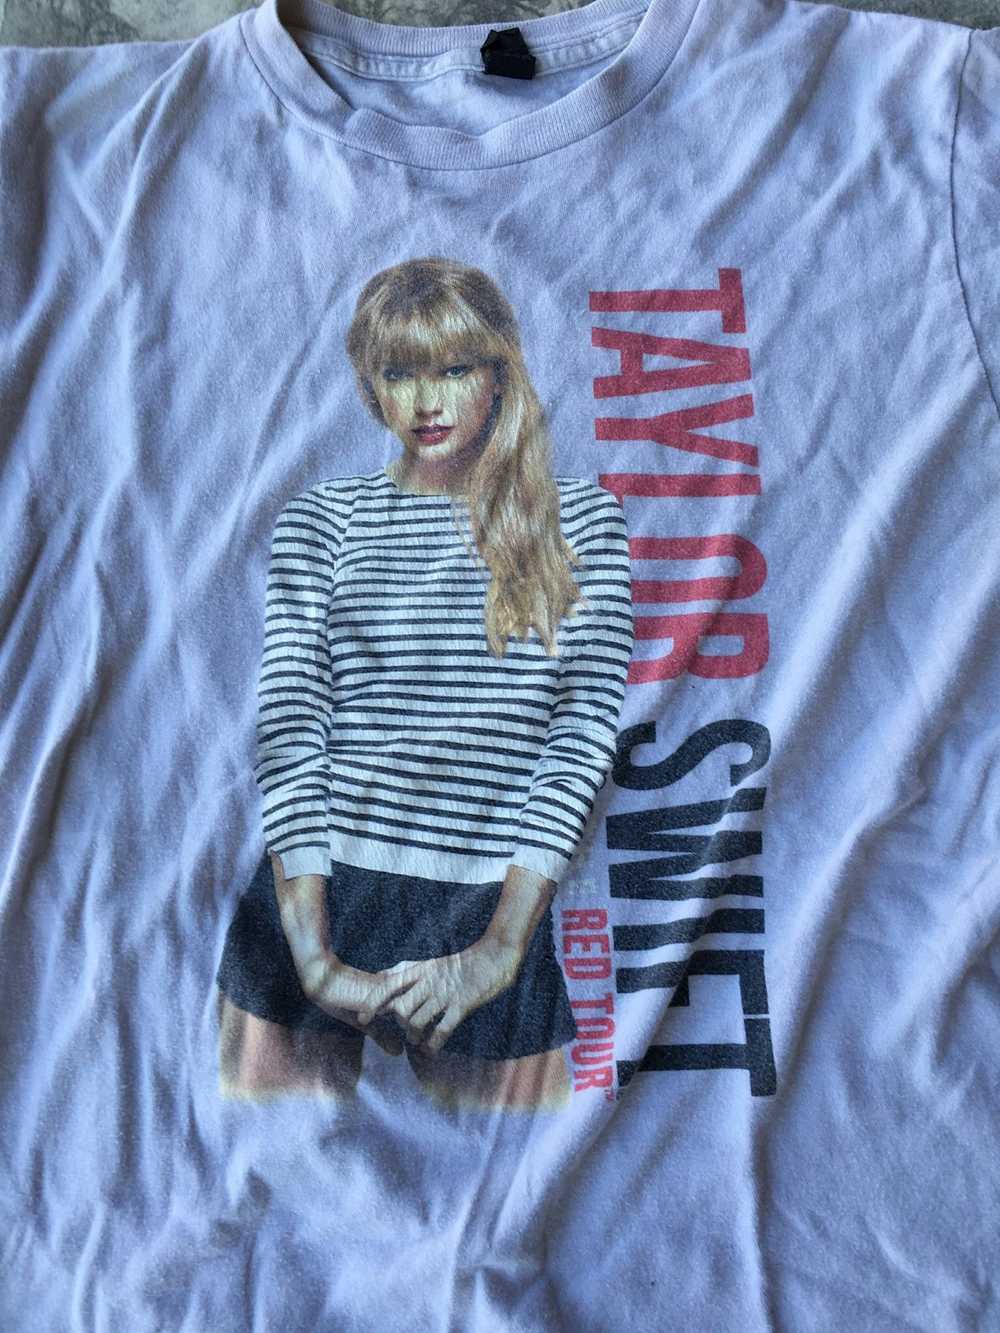 Vintage 2013 Taylor Swift Code Red Tour Tee - image 2